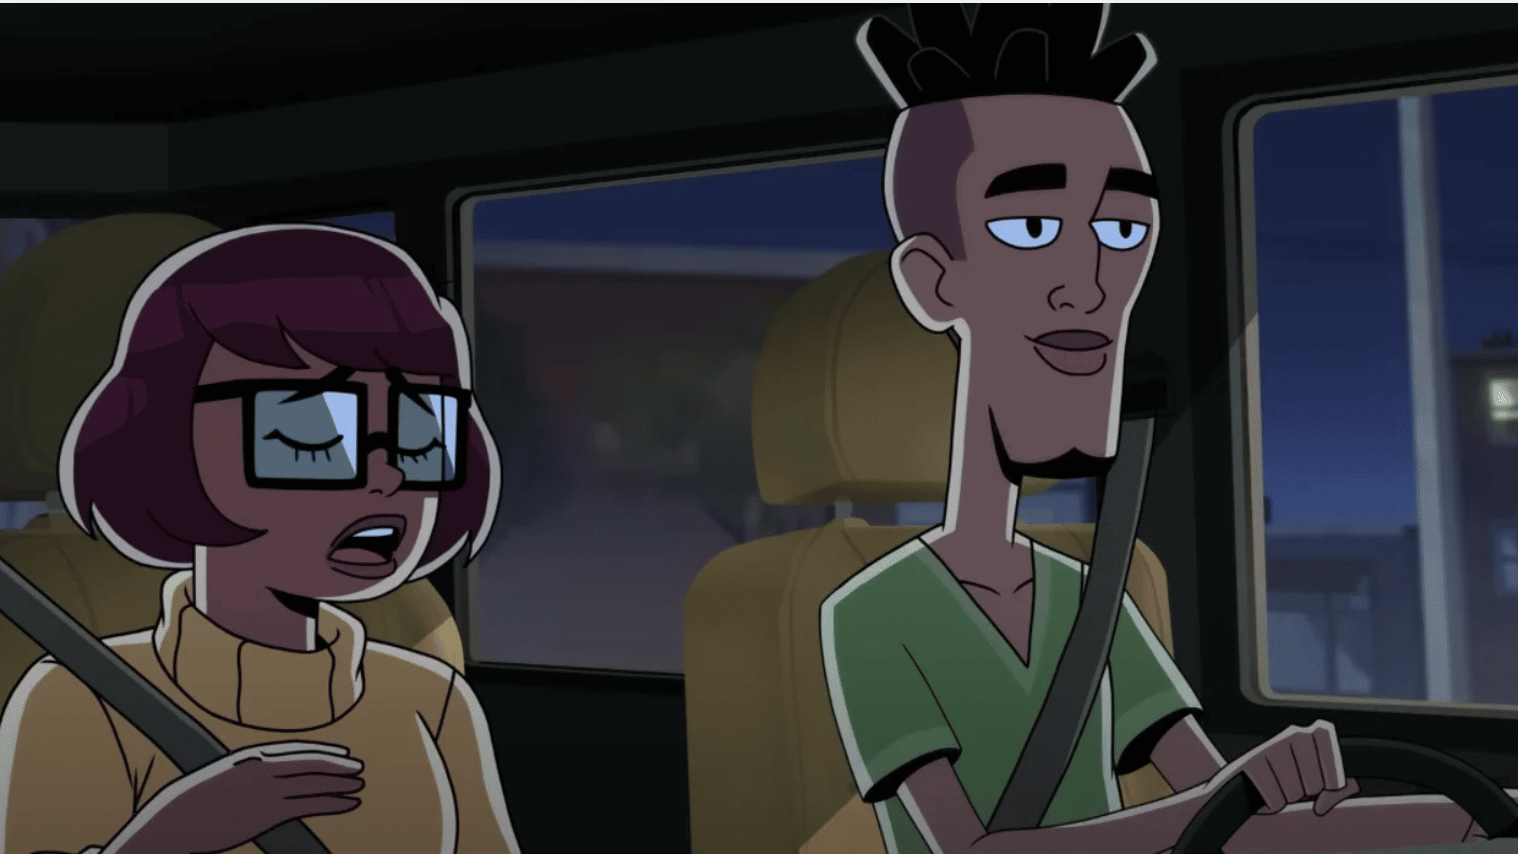 New Scooby-Doo reboot portrays ‘Velma’ as lesbian pushing nude scenes, drugs, and LGBTQ agenda